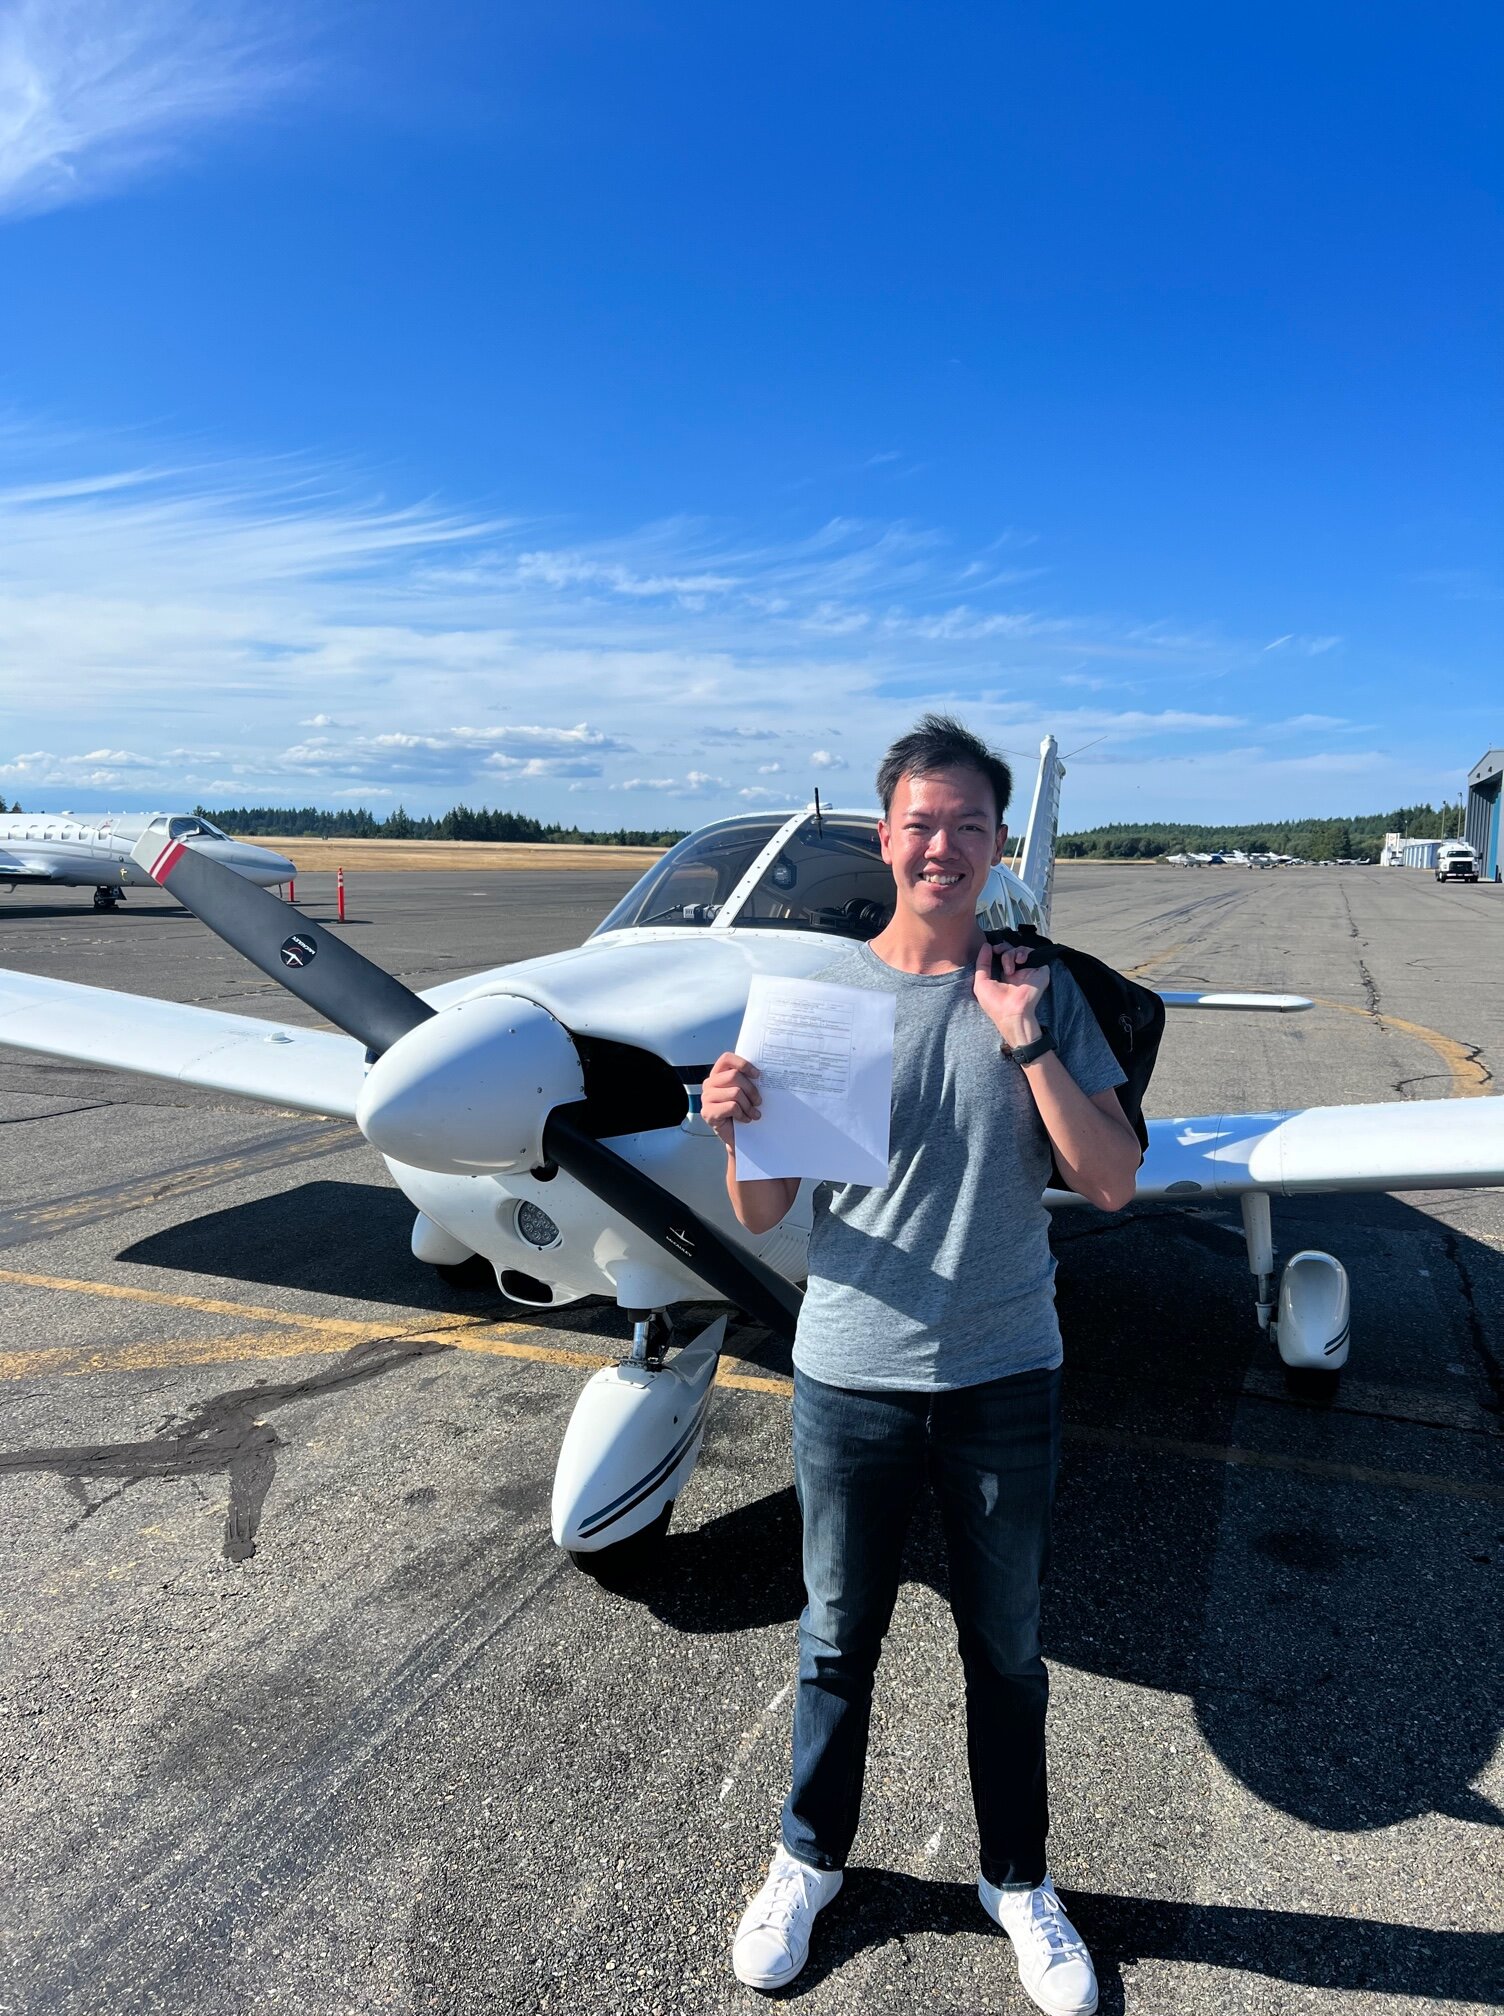 Congratulations to our latest accelerated PPL Student, Leon! All the way from Singapore, Leon just passed his FAA PPL checkride with us. 

Inquire on our website for the fastest way to earn your PPL!
Www.Mach-six.us
-
-
-
-
-
-#aviation #plane #plane